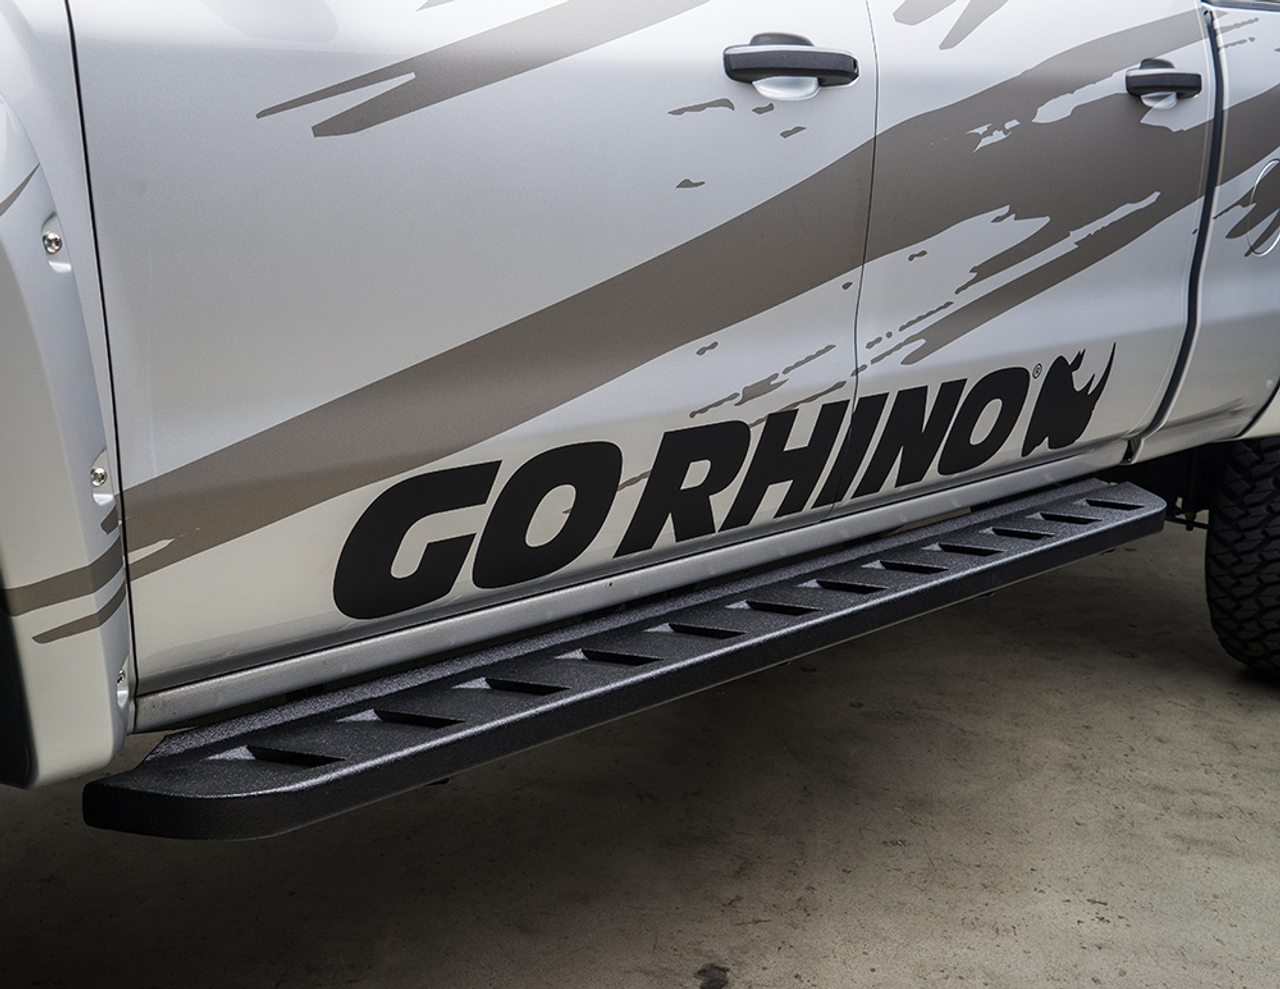 Go Rhino 63417780T Ford, F-250, F-350, 2017 - 2021, RB10 Running boards - Complete Kit: RB10 Running boards + Brackets, Galvanized Steel, Protective Bedliner coating, 630080T RB10 + 6941555 RB Brackets